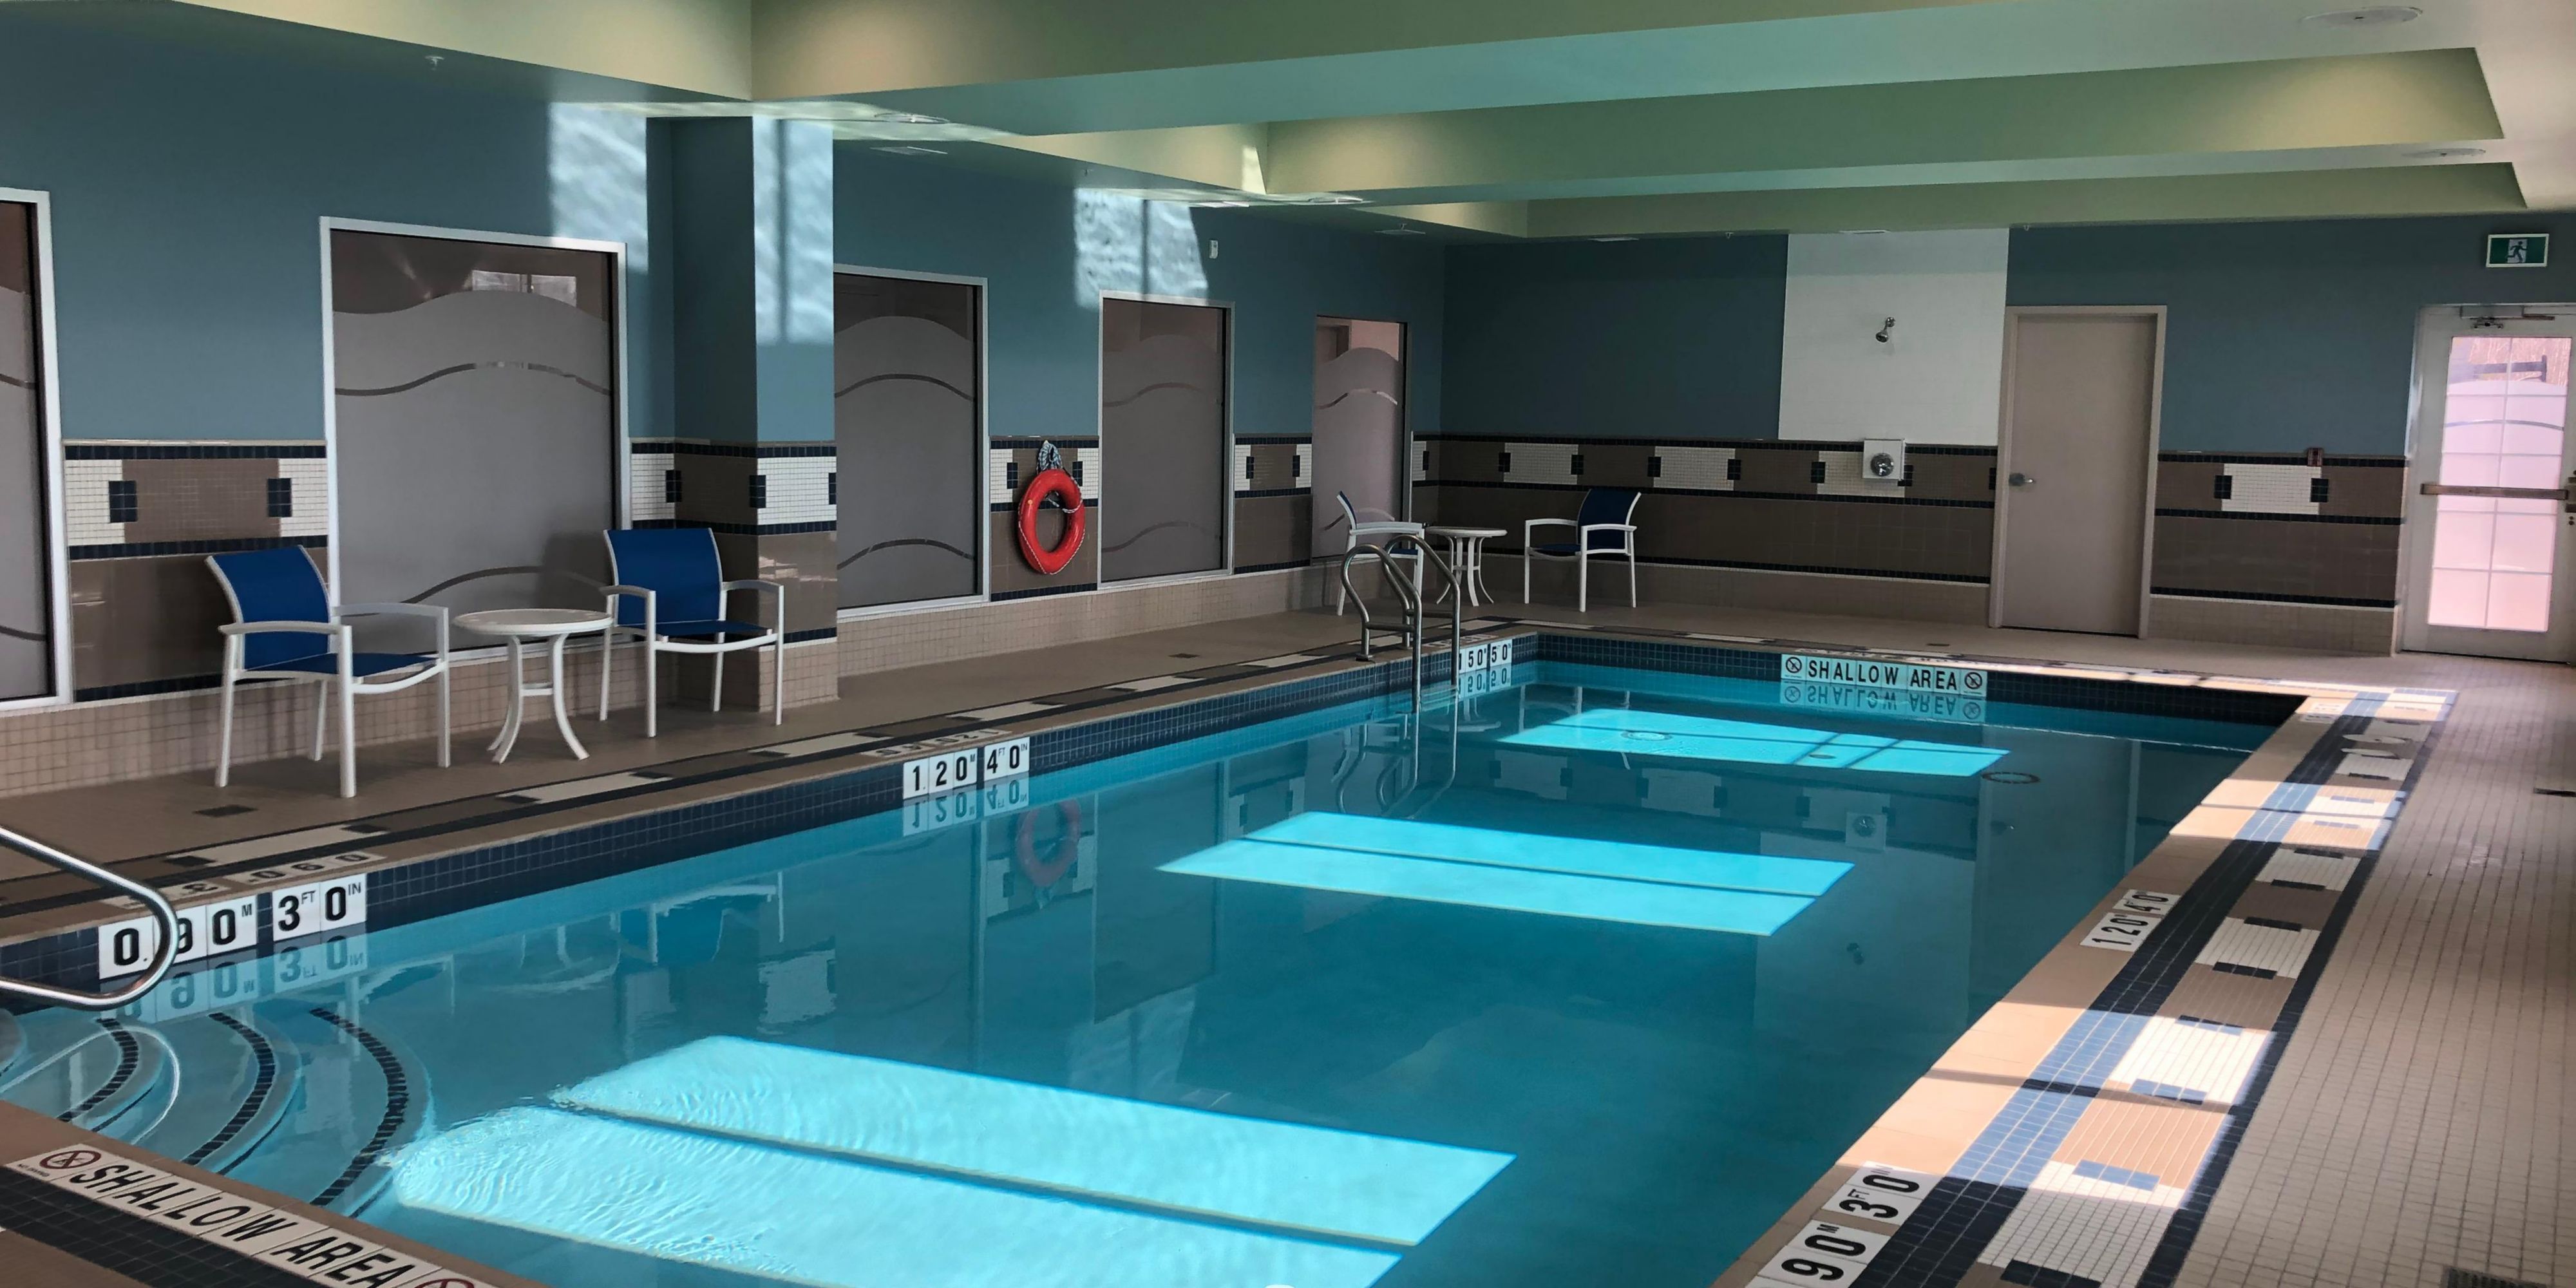 Whether you like to swim laps, splash around with your kids, or take a serene dip, our pool is your happy place. Our indoor, heated mineral pool helps you unwind at the end of a long day and soak your stress away. Open daily 5:30AM – 10:30PM. 